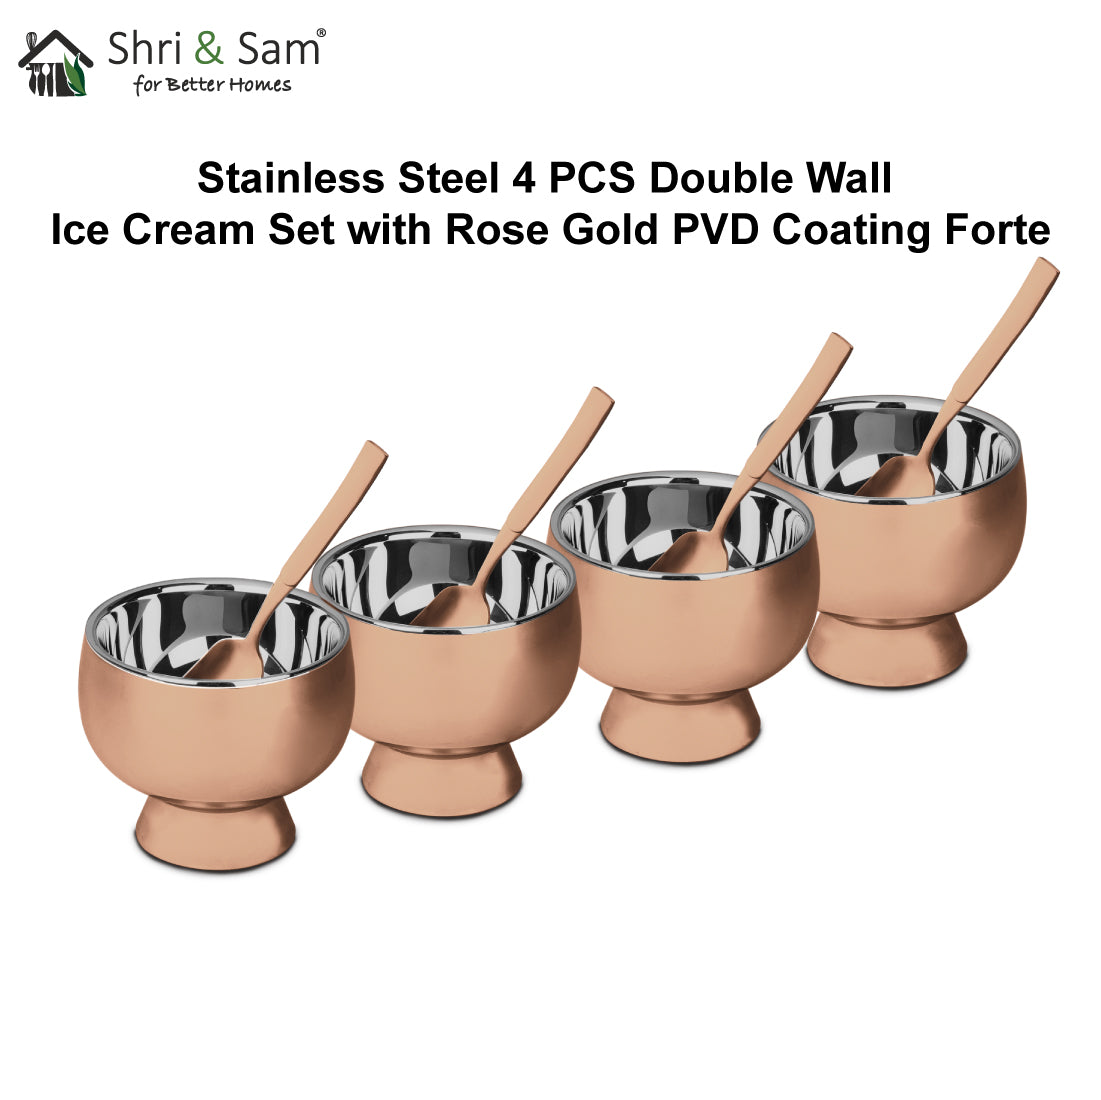 Stainless Steel 4 PCS Double Wall Ice Cream Set with Rose Gold PVD Coating Forte